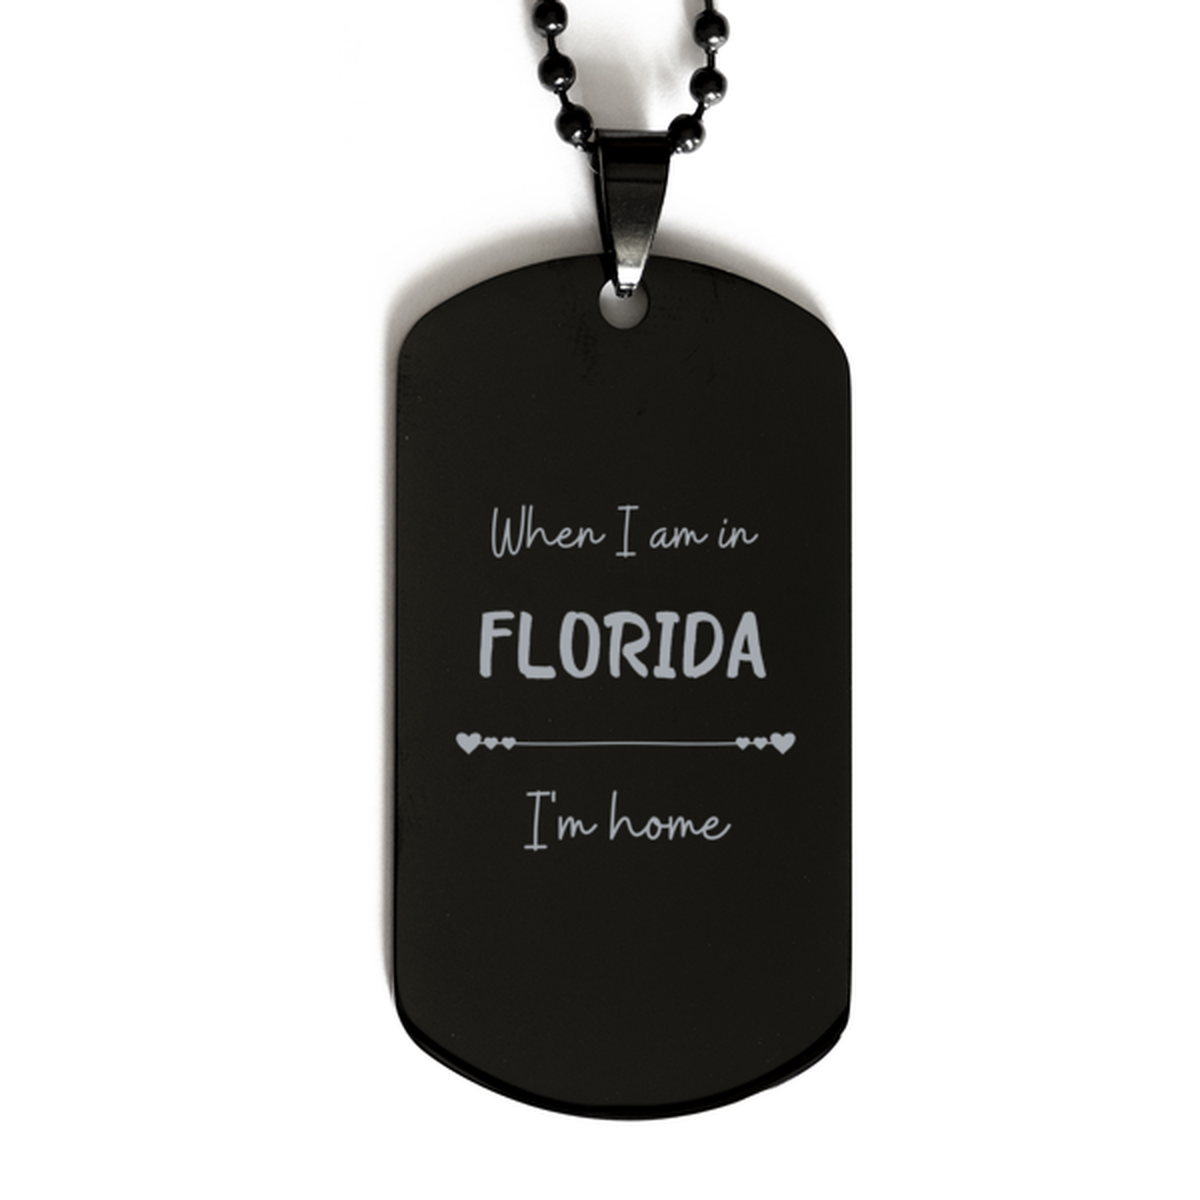 When I am in Florida I'm home Black Dog Tag, Cheap Gifts For Florida, State Florida Birthday Gifts for Friends Coworker